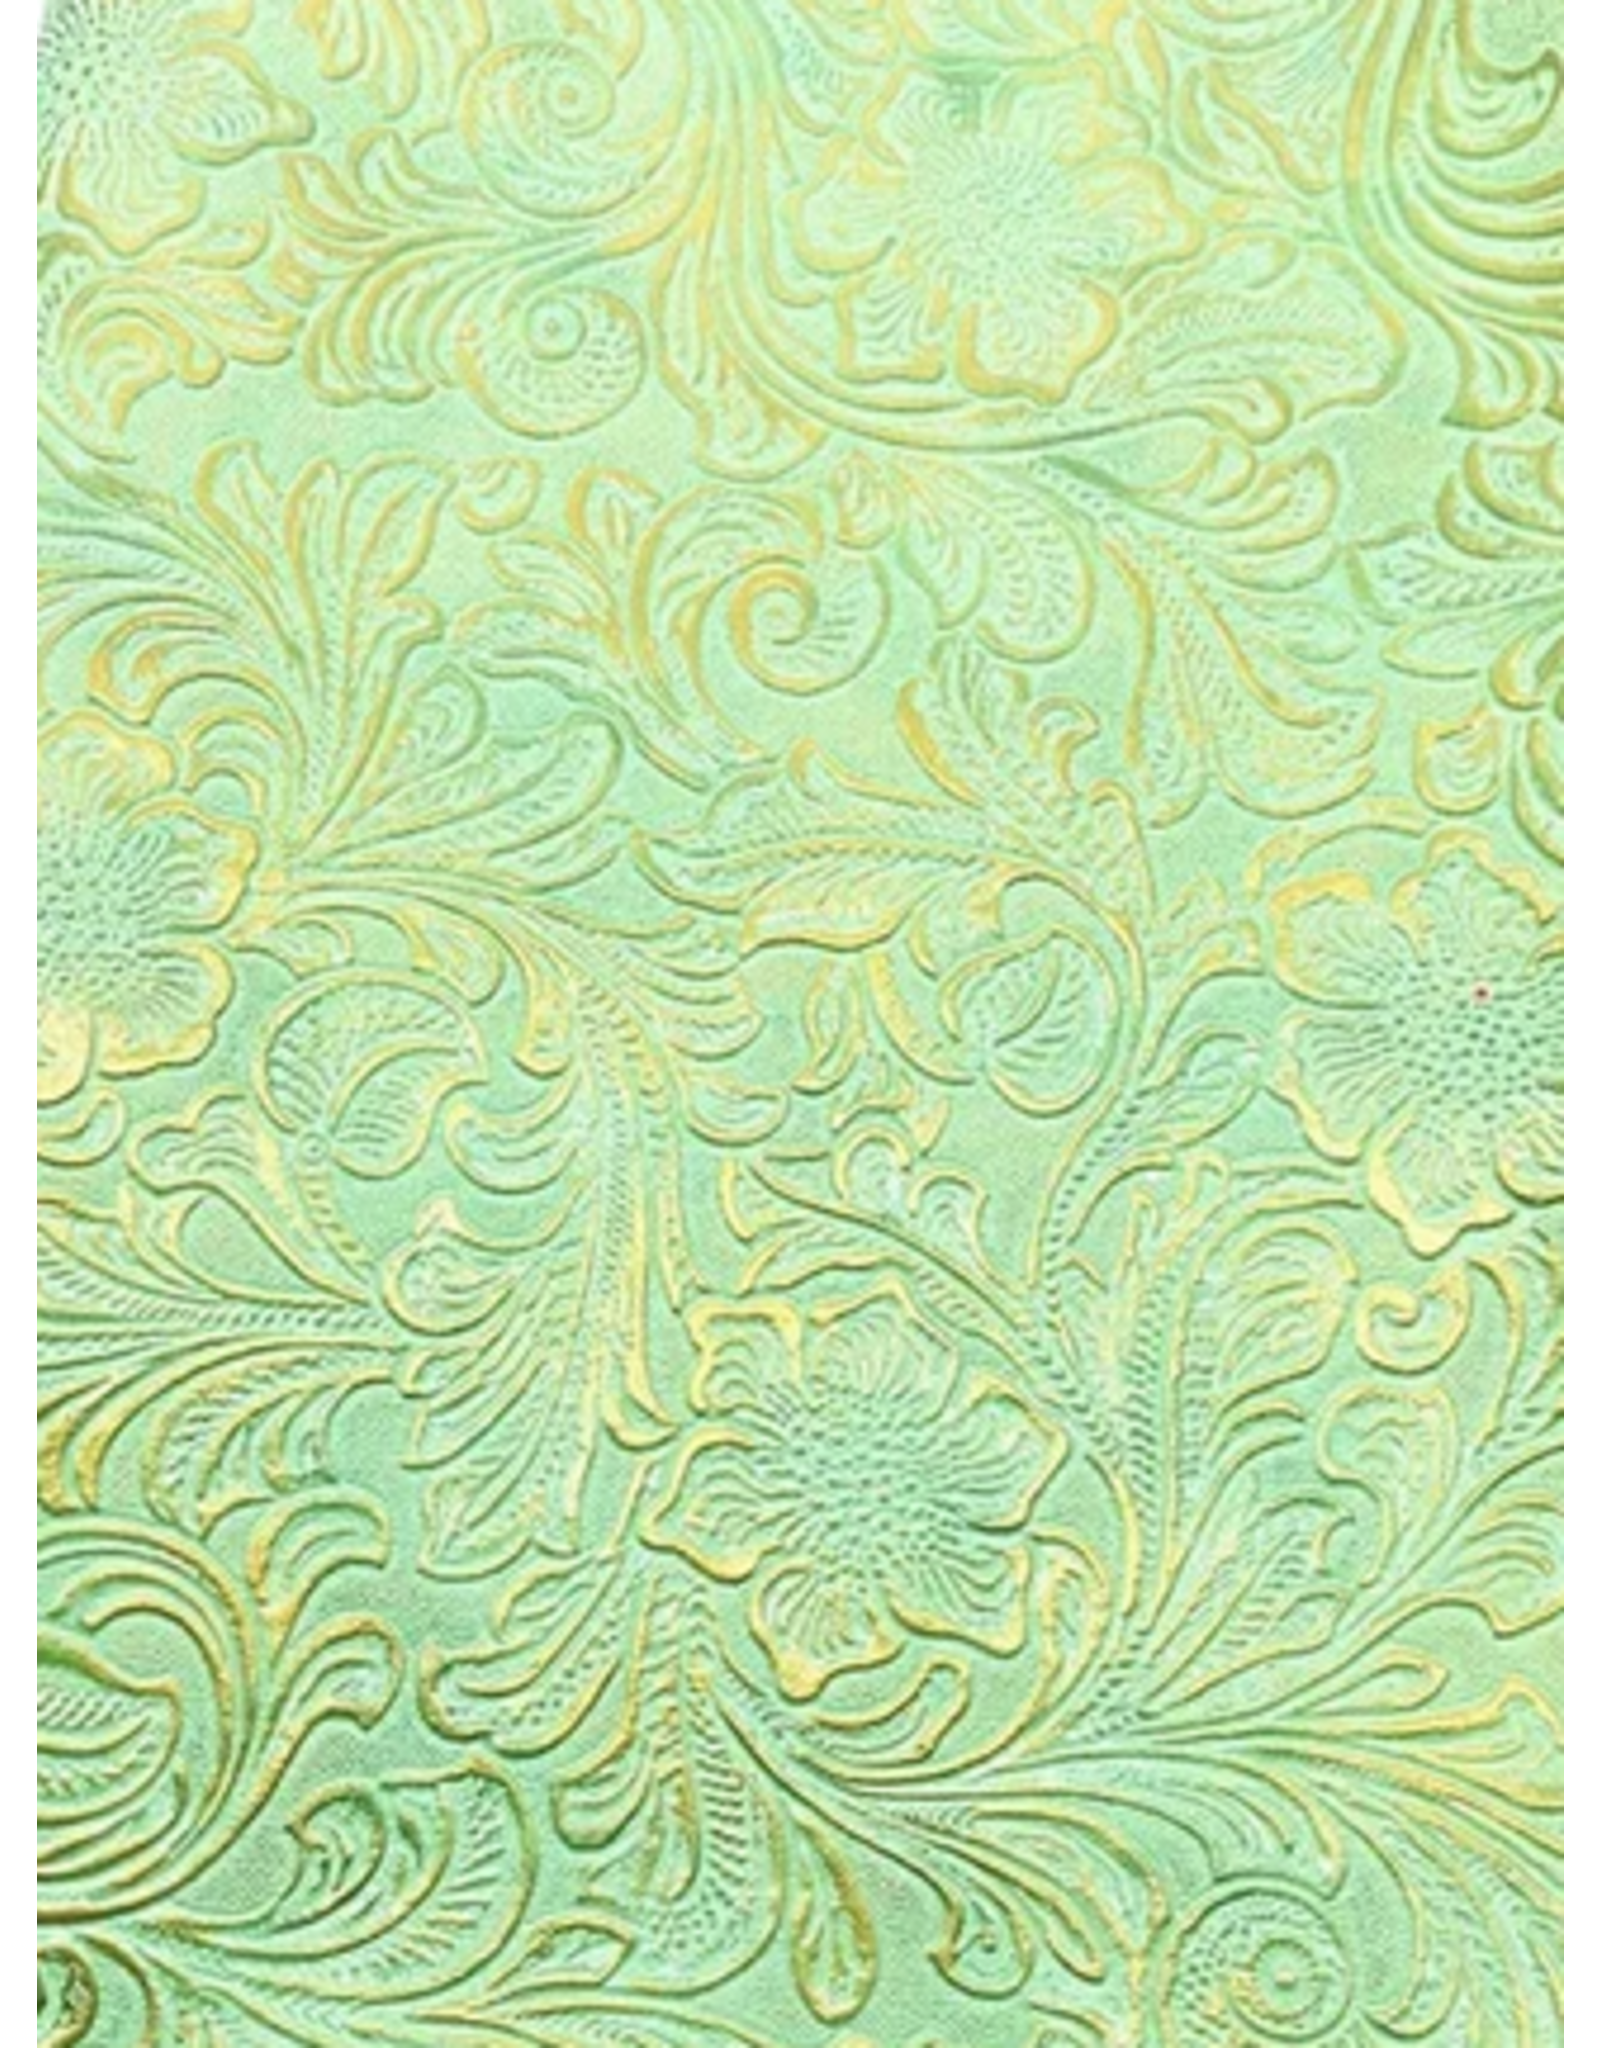 Faux Leather Beading Backing Mint Green Bronze Floral   .8mm thick 8x11"